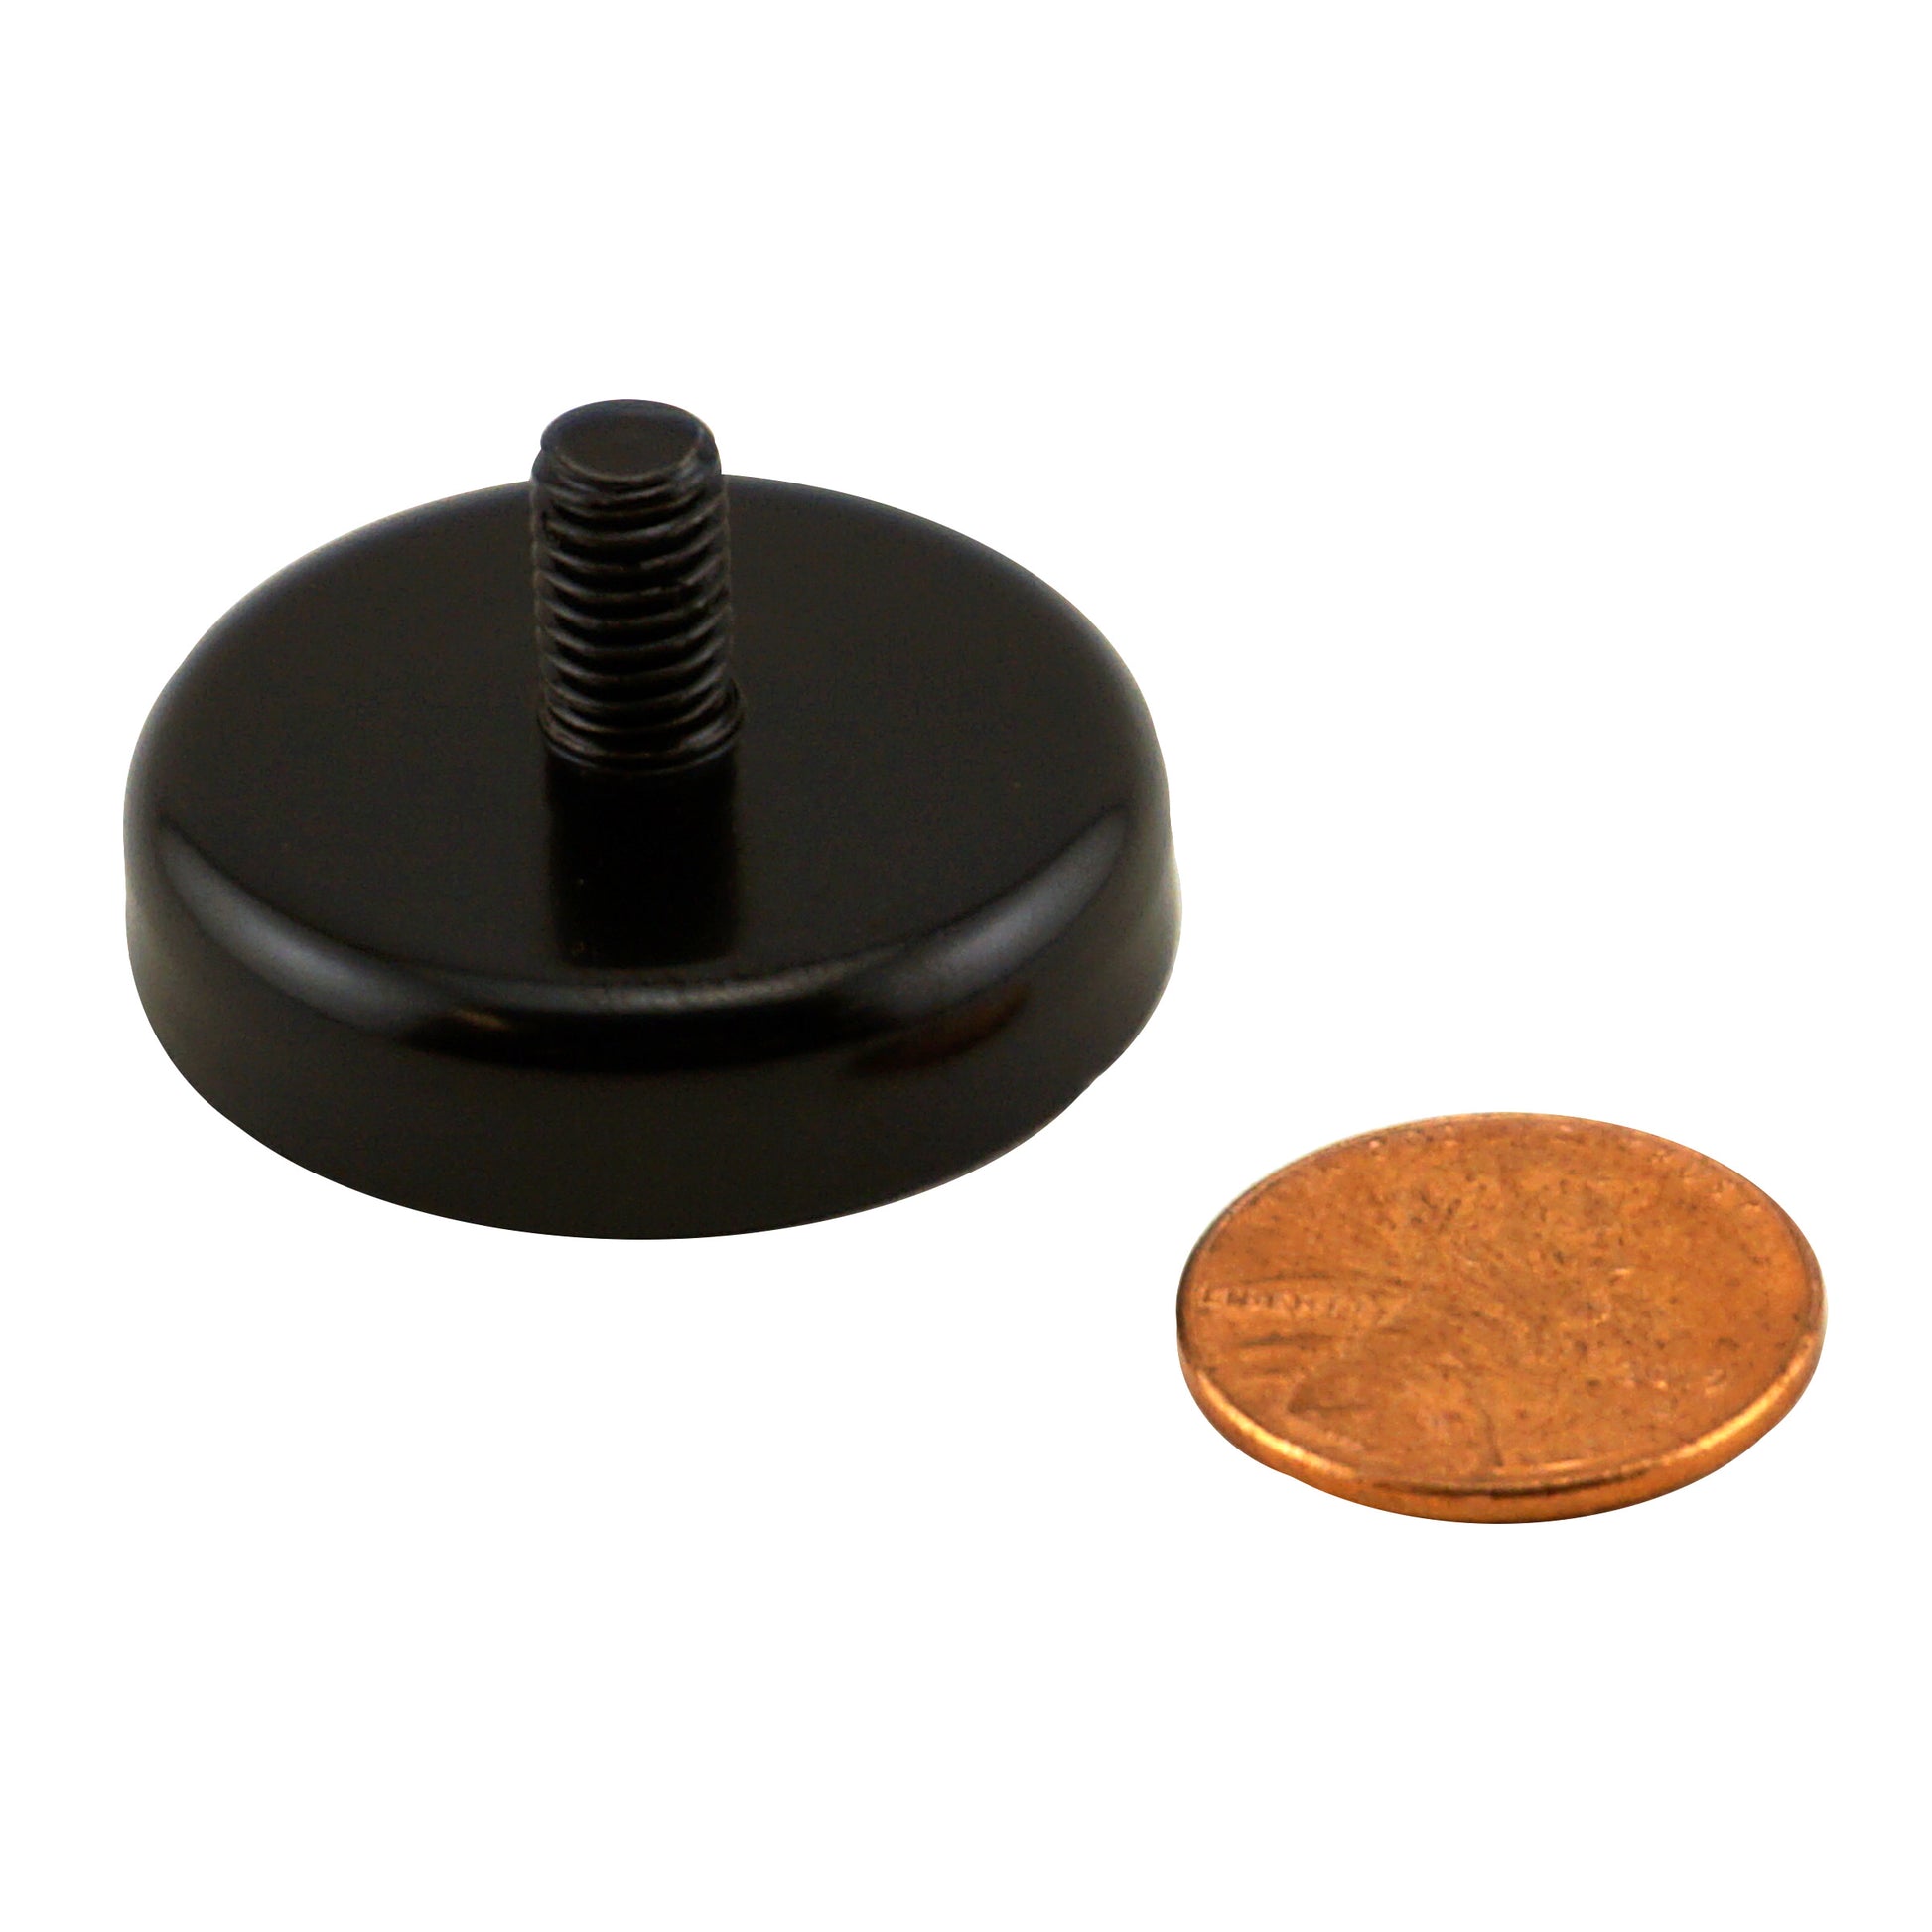 Load image into Gallery viewer, CACM126S01BPC Ceramic Round Base Magnet with Male Thread - Compared to Penny for Size Reference